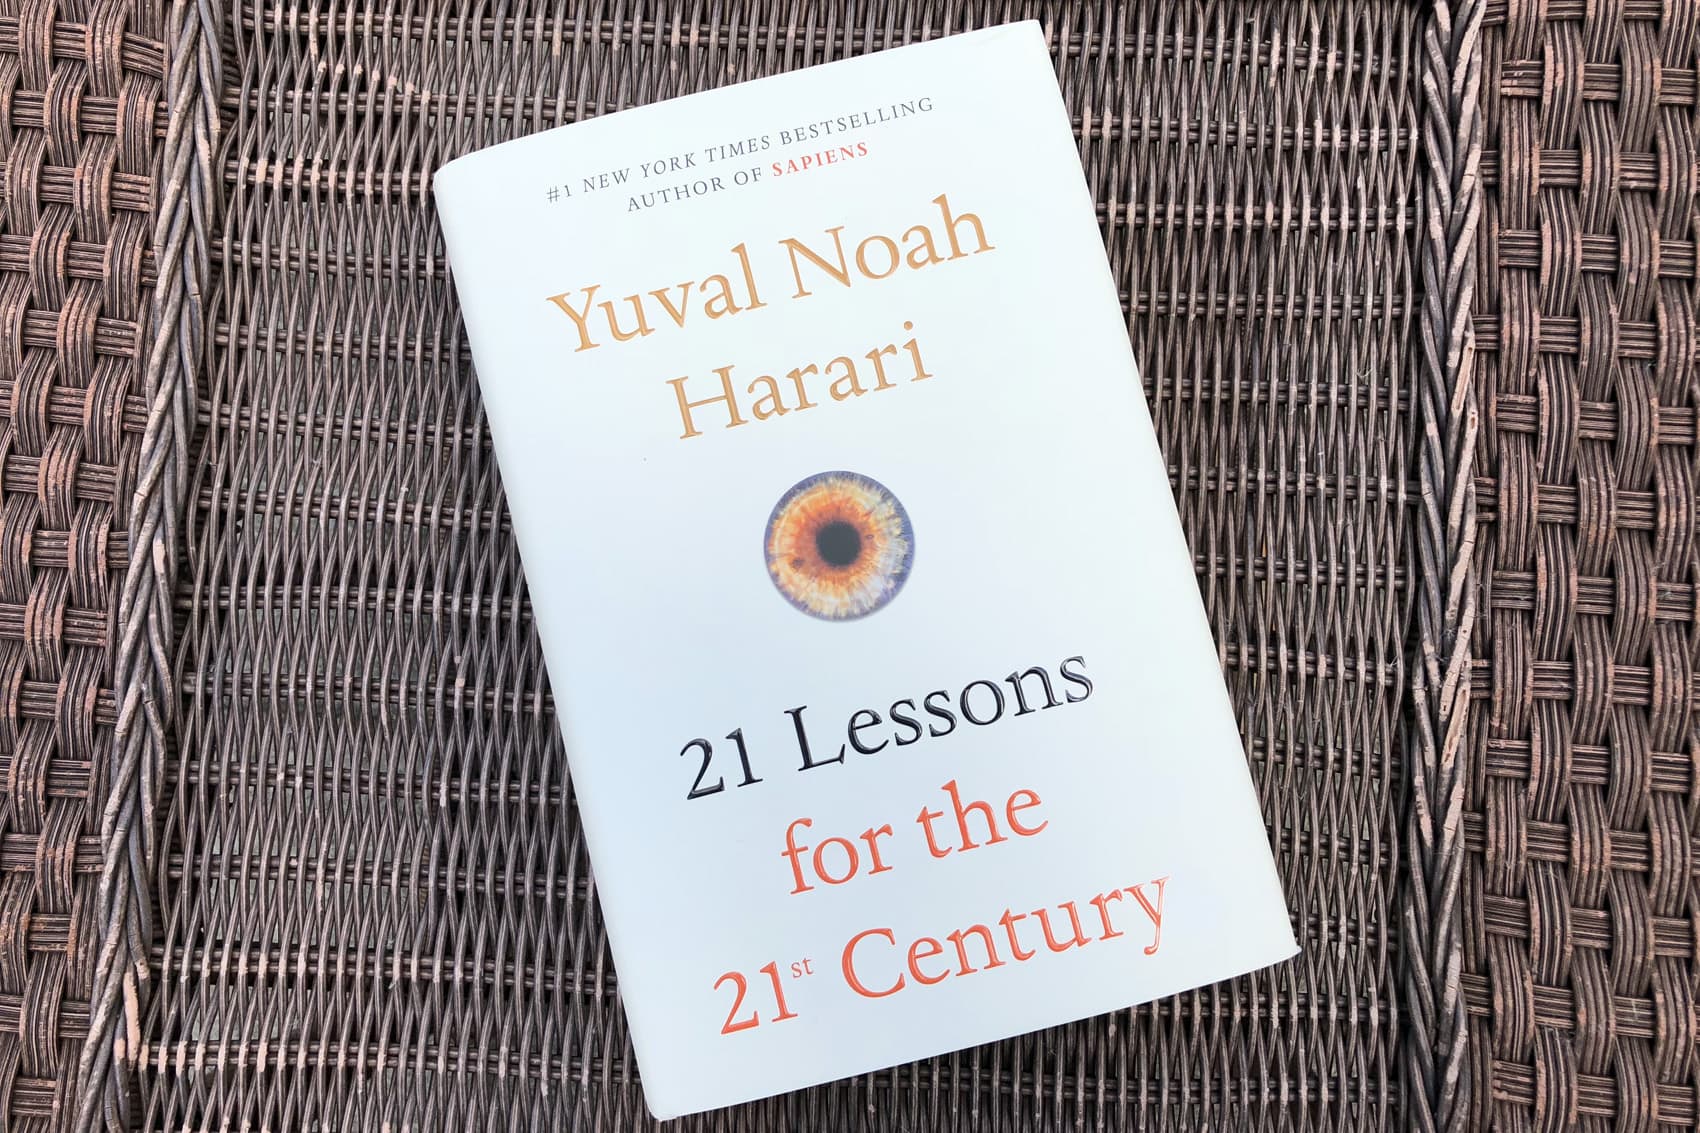 21 lessons for the 21st century by yuval noah harari